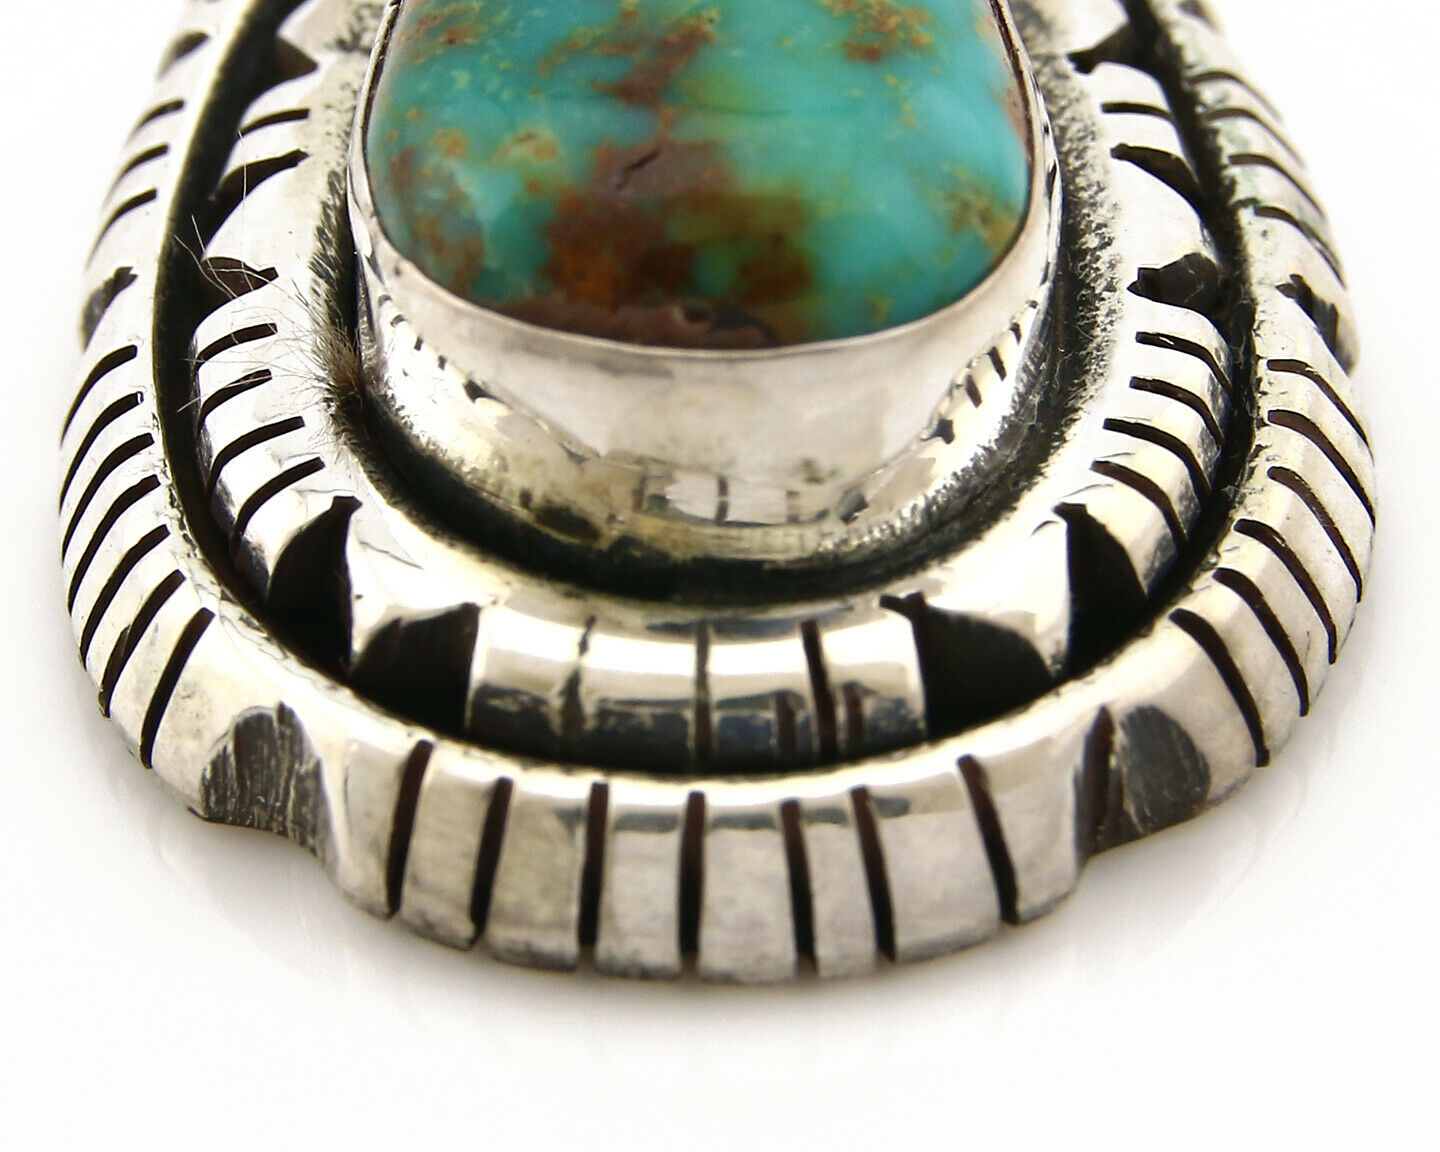 Navajo Pendant .925 Silver Royston Turquoise Signed Artist FT C.80's